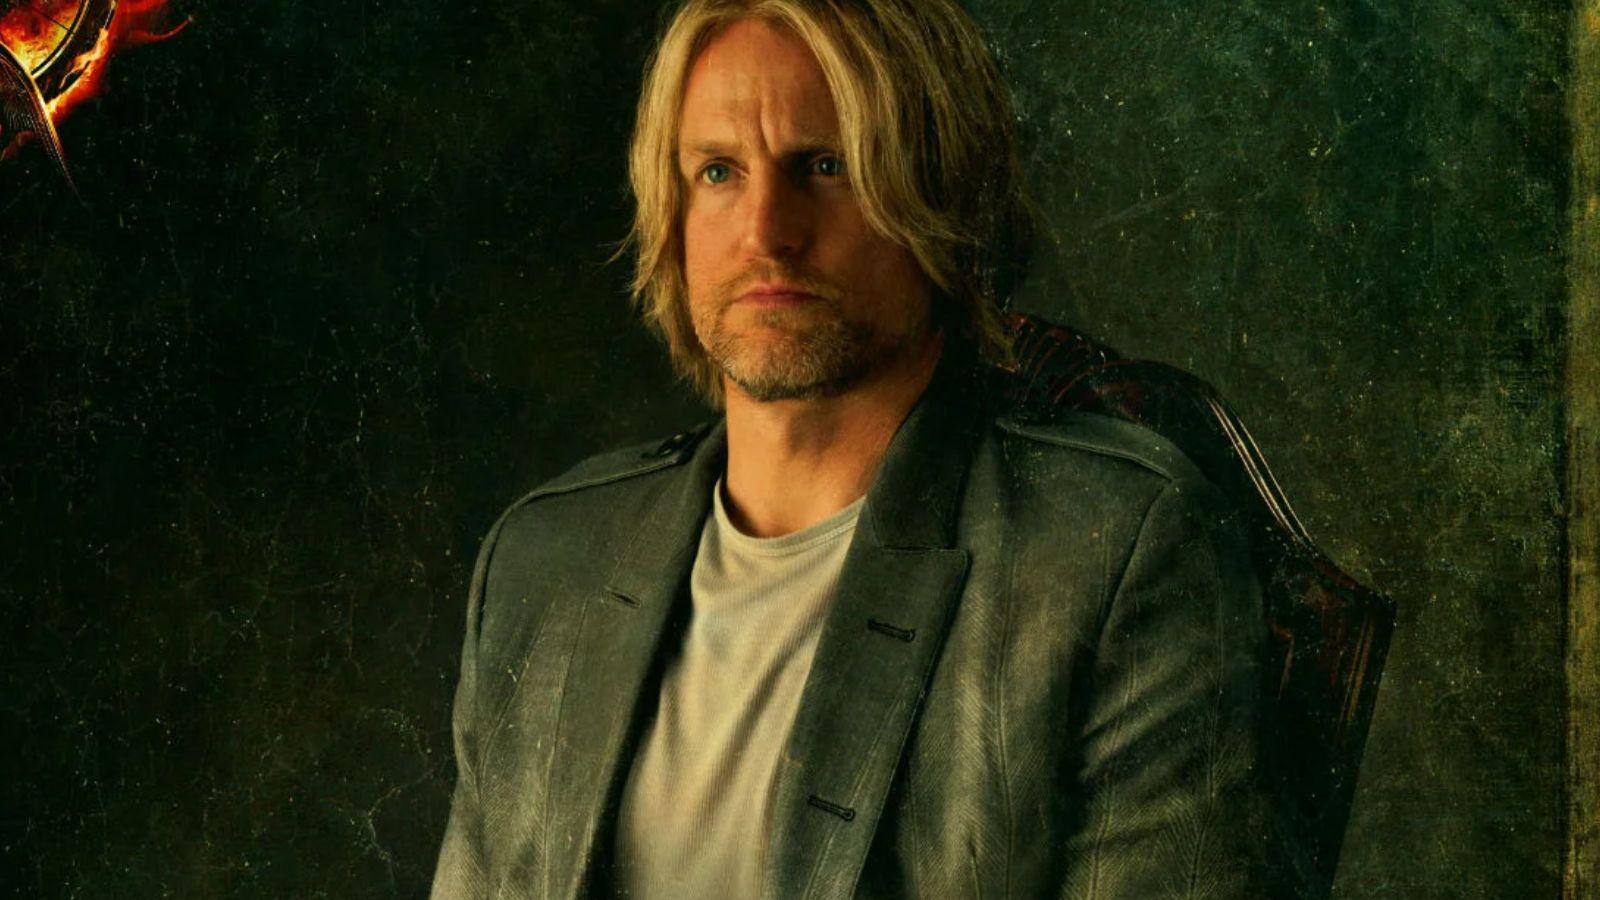 Woody Harrelson as Haymitch Abernathy in The Hunger Games Catching Fire.